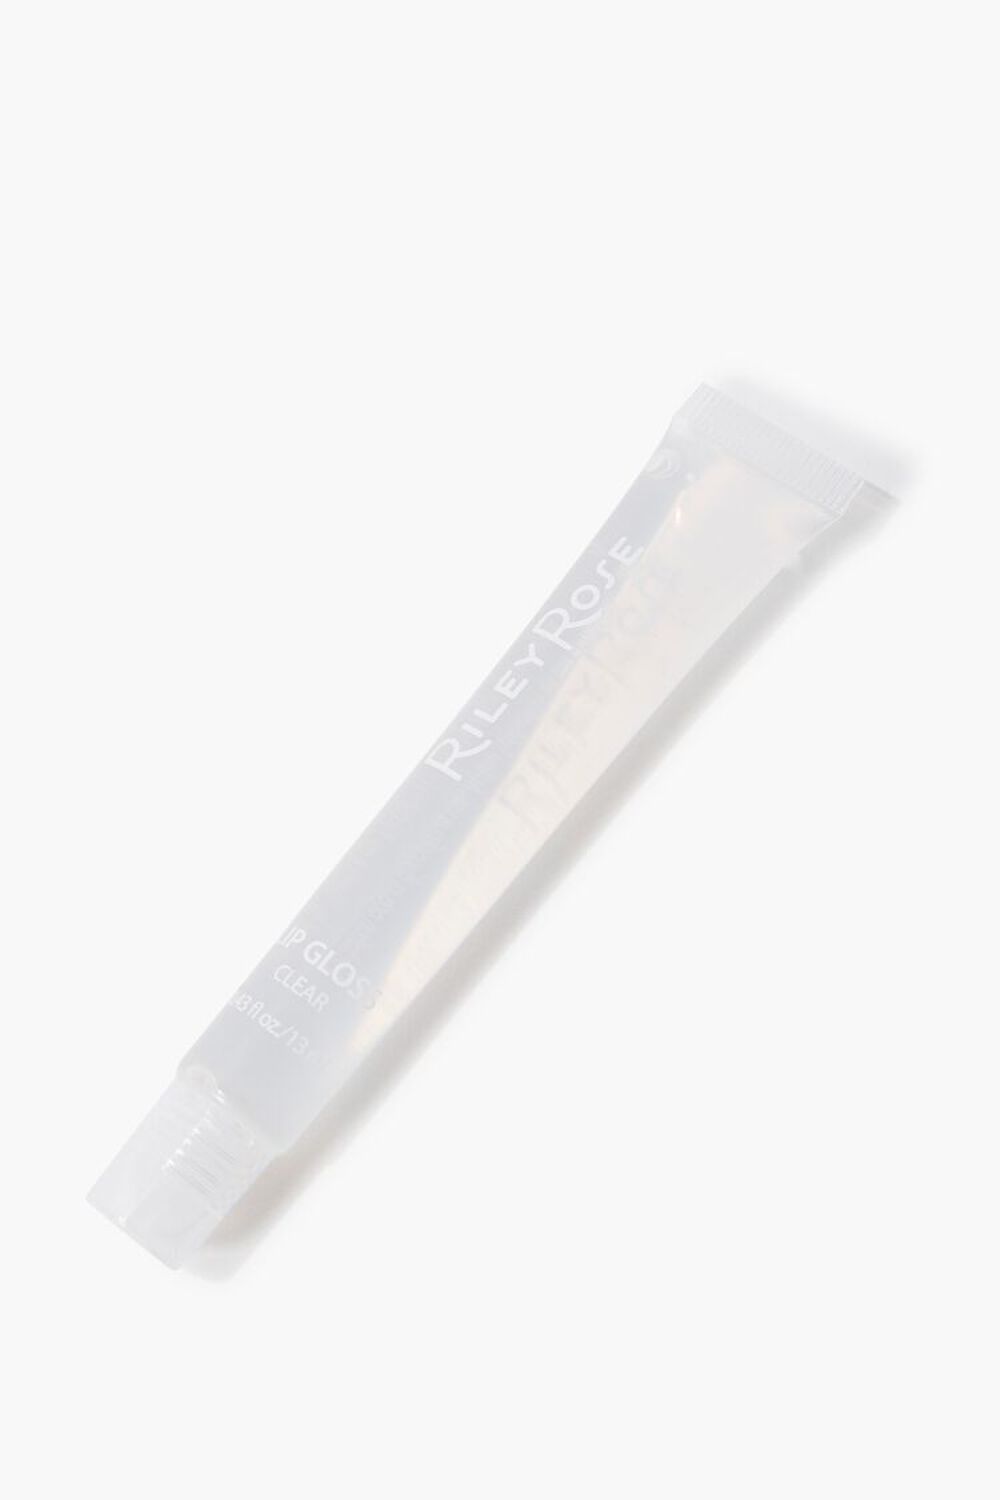 CLEAR Riley Rose Lip Gloss - Clear, image 2